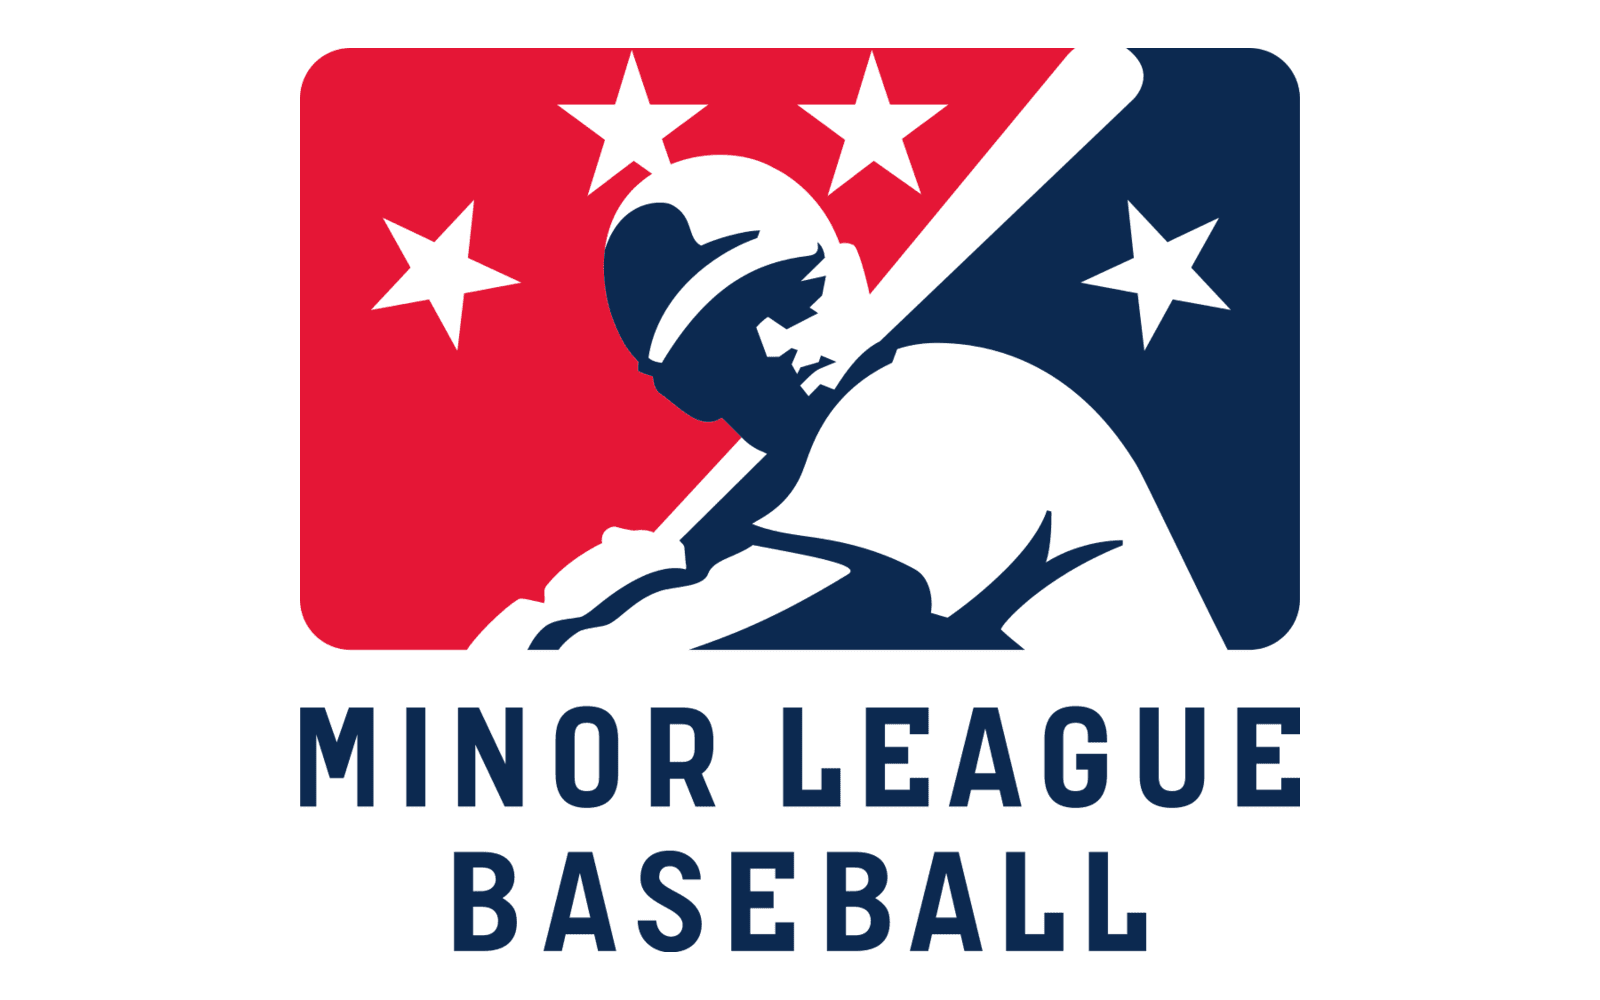 Minor league logos have come a long way since these primitive versions from  '80s